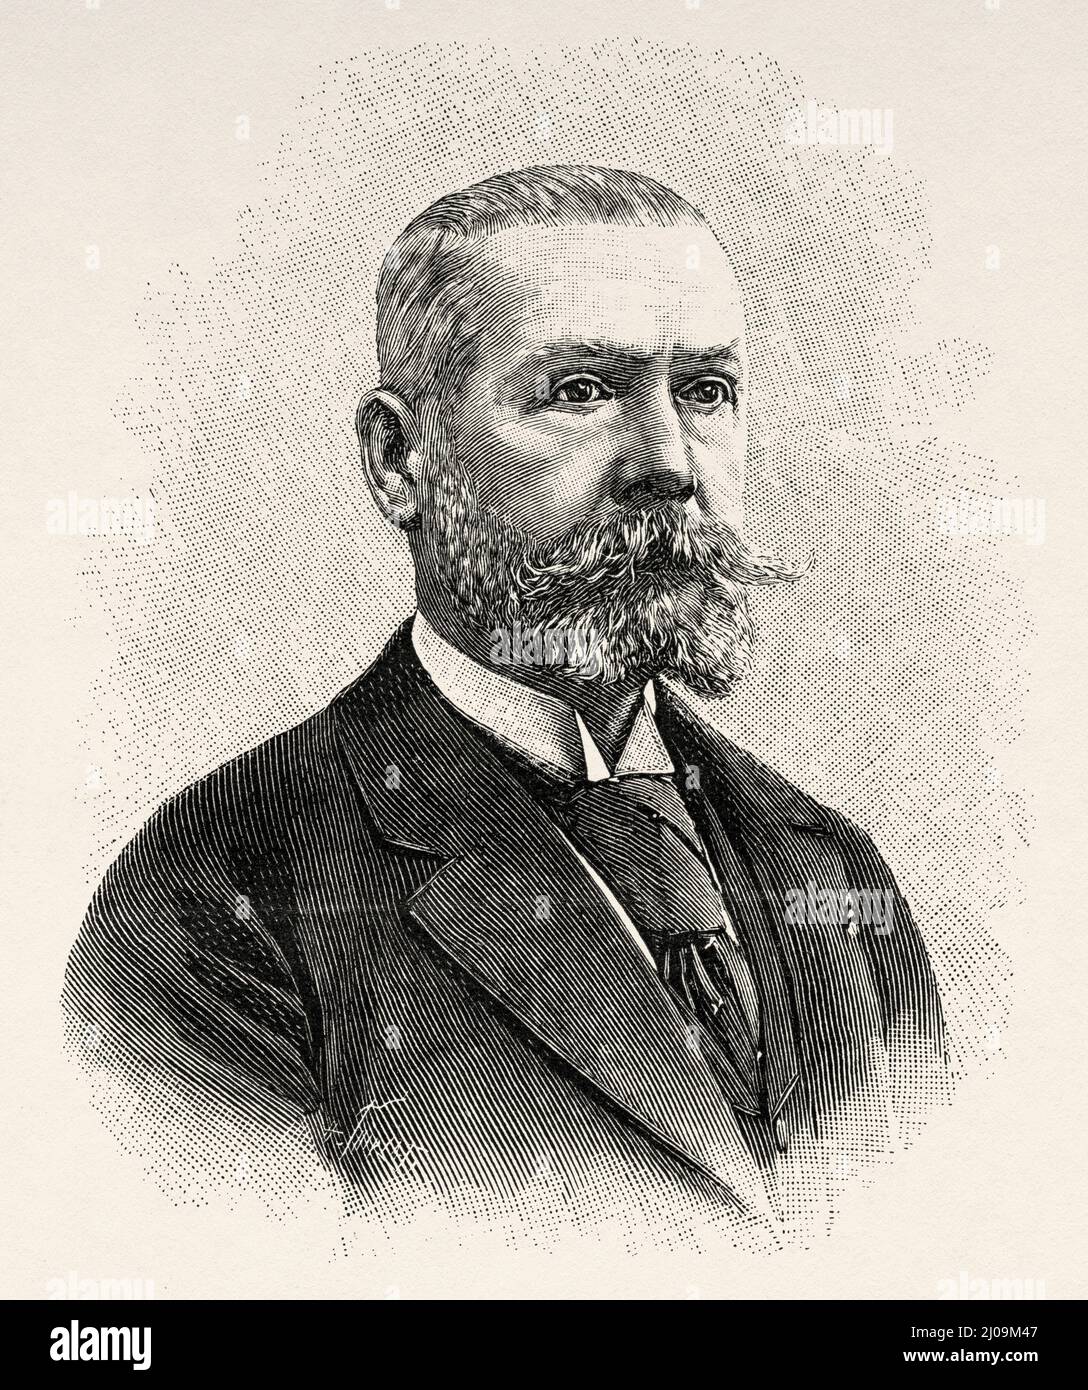 Gaston Tissandier (1843-1899) was a French chemist, meteorologist, aviator and editor. He founded and edited the scientific magazine La Nature and wrote several books. France, Europe. Old 19th century engraved illustration from La Nature 1899 Stock Photo